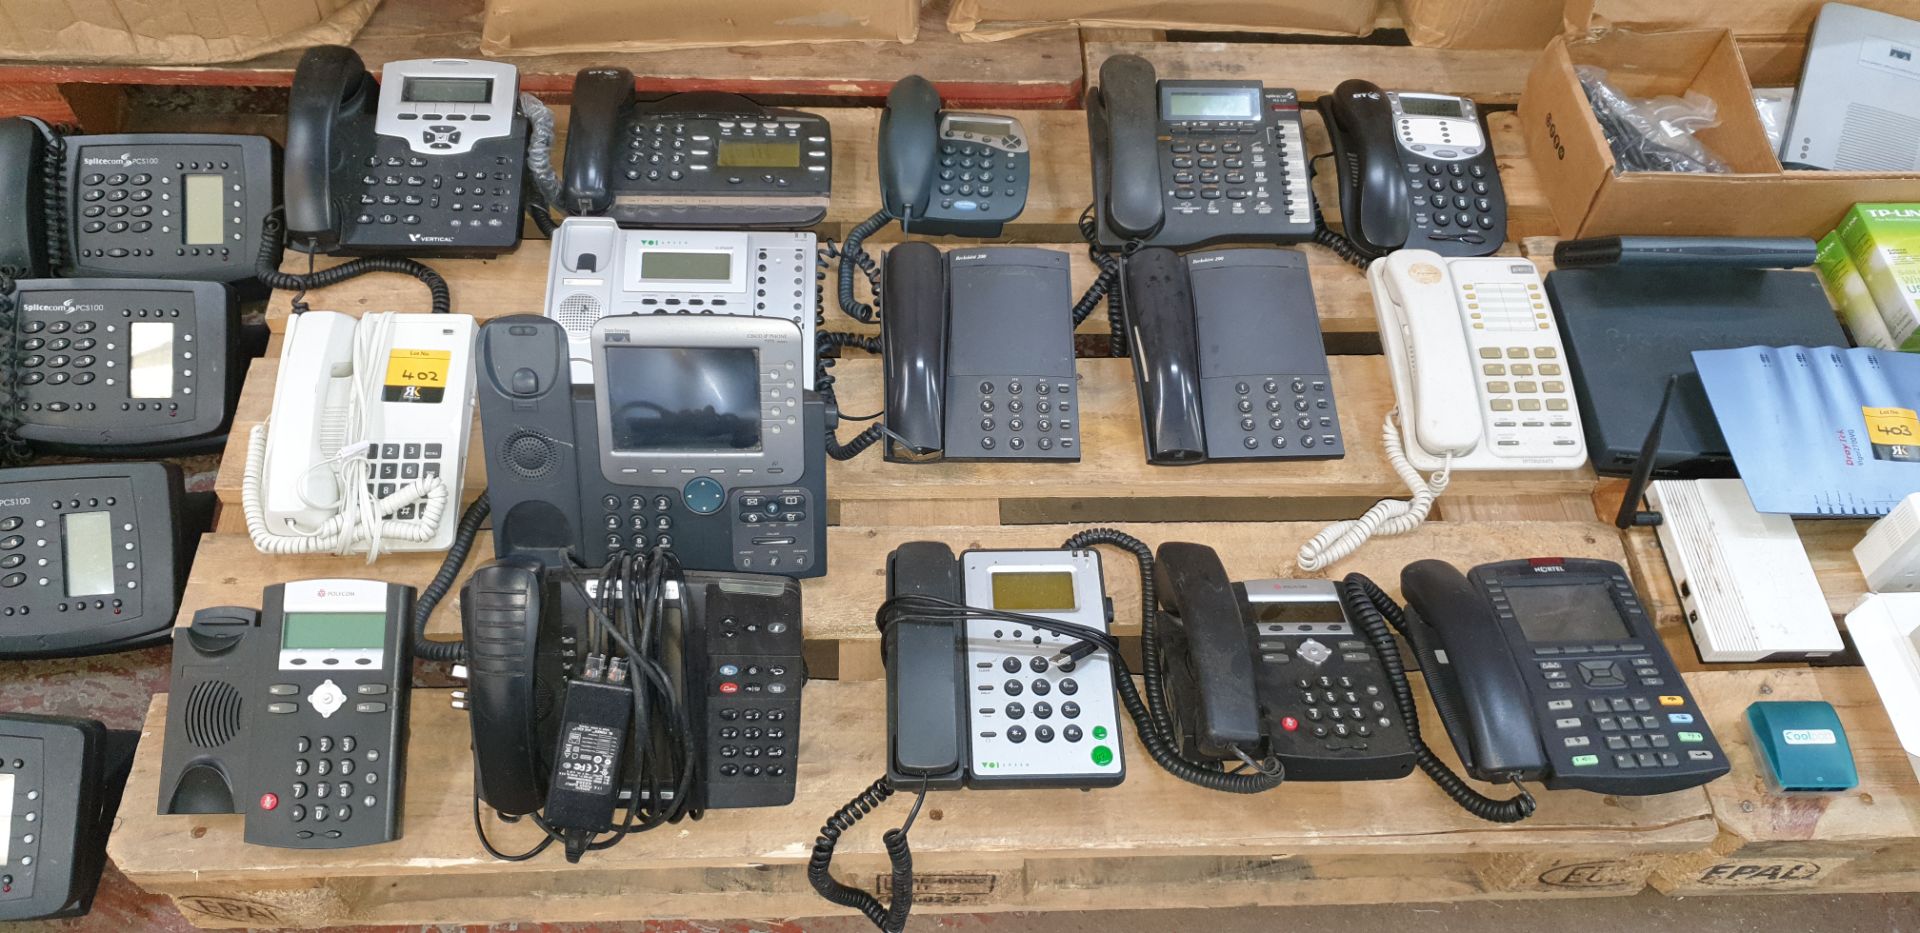 16 off assorted telephone handsets by Polycom, Cisco, Splicecom, Nortel & others